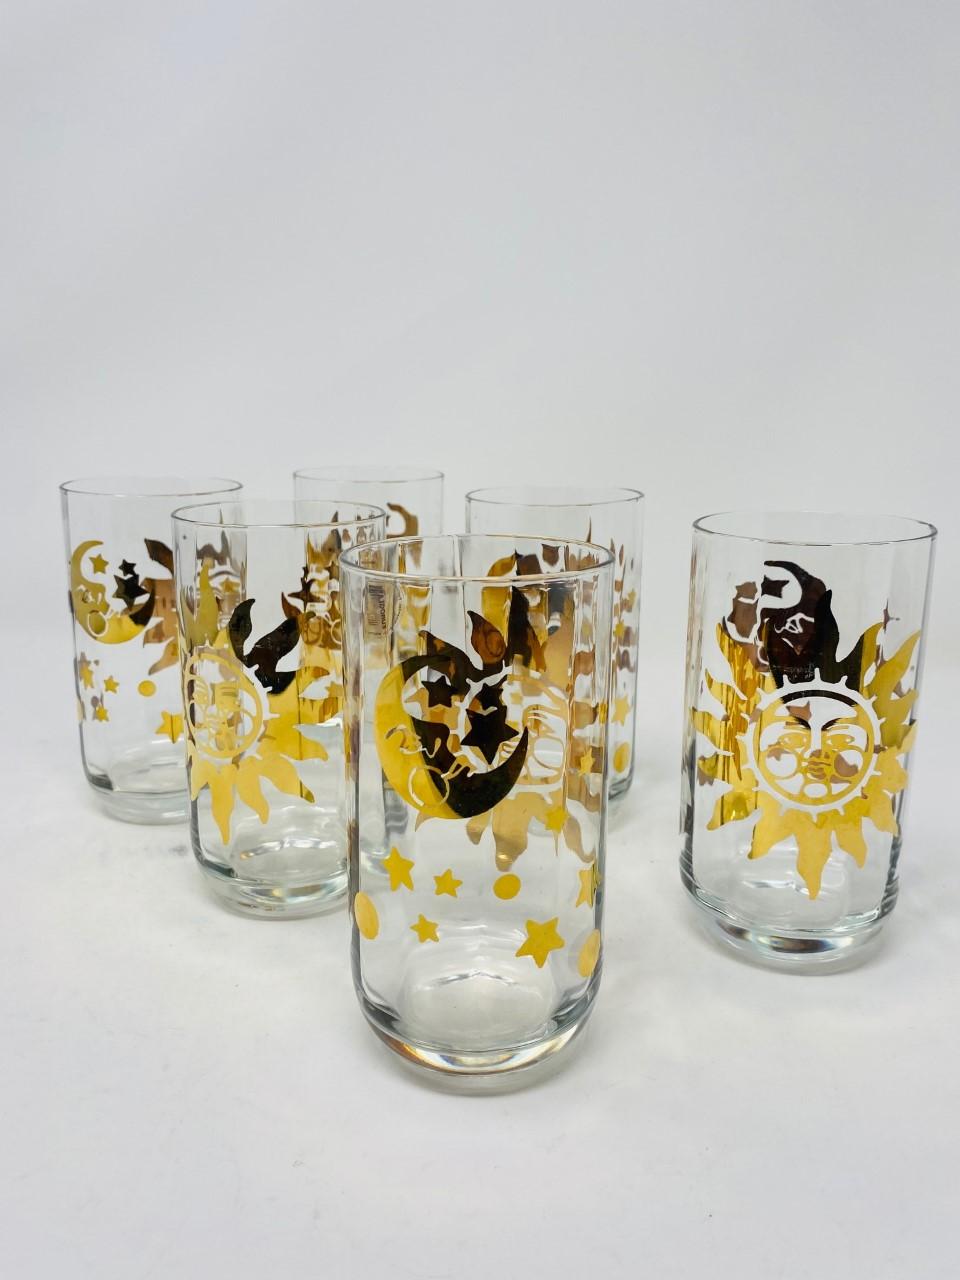 Set of 6 Sun Moon and Stars High Ball Crystal Glasses 1990s Made in Italy In Good Condition For Sale In San Diego, CA